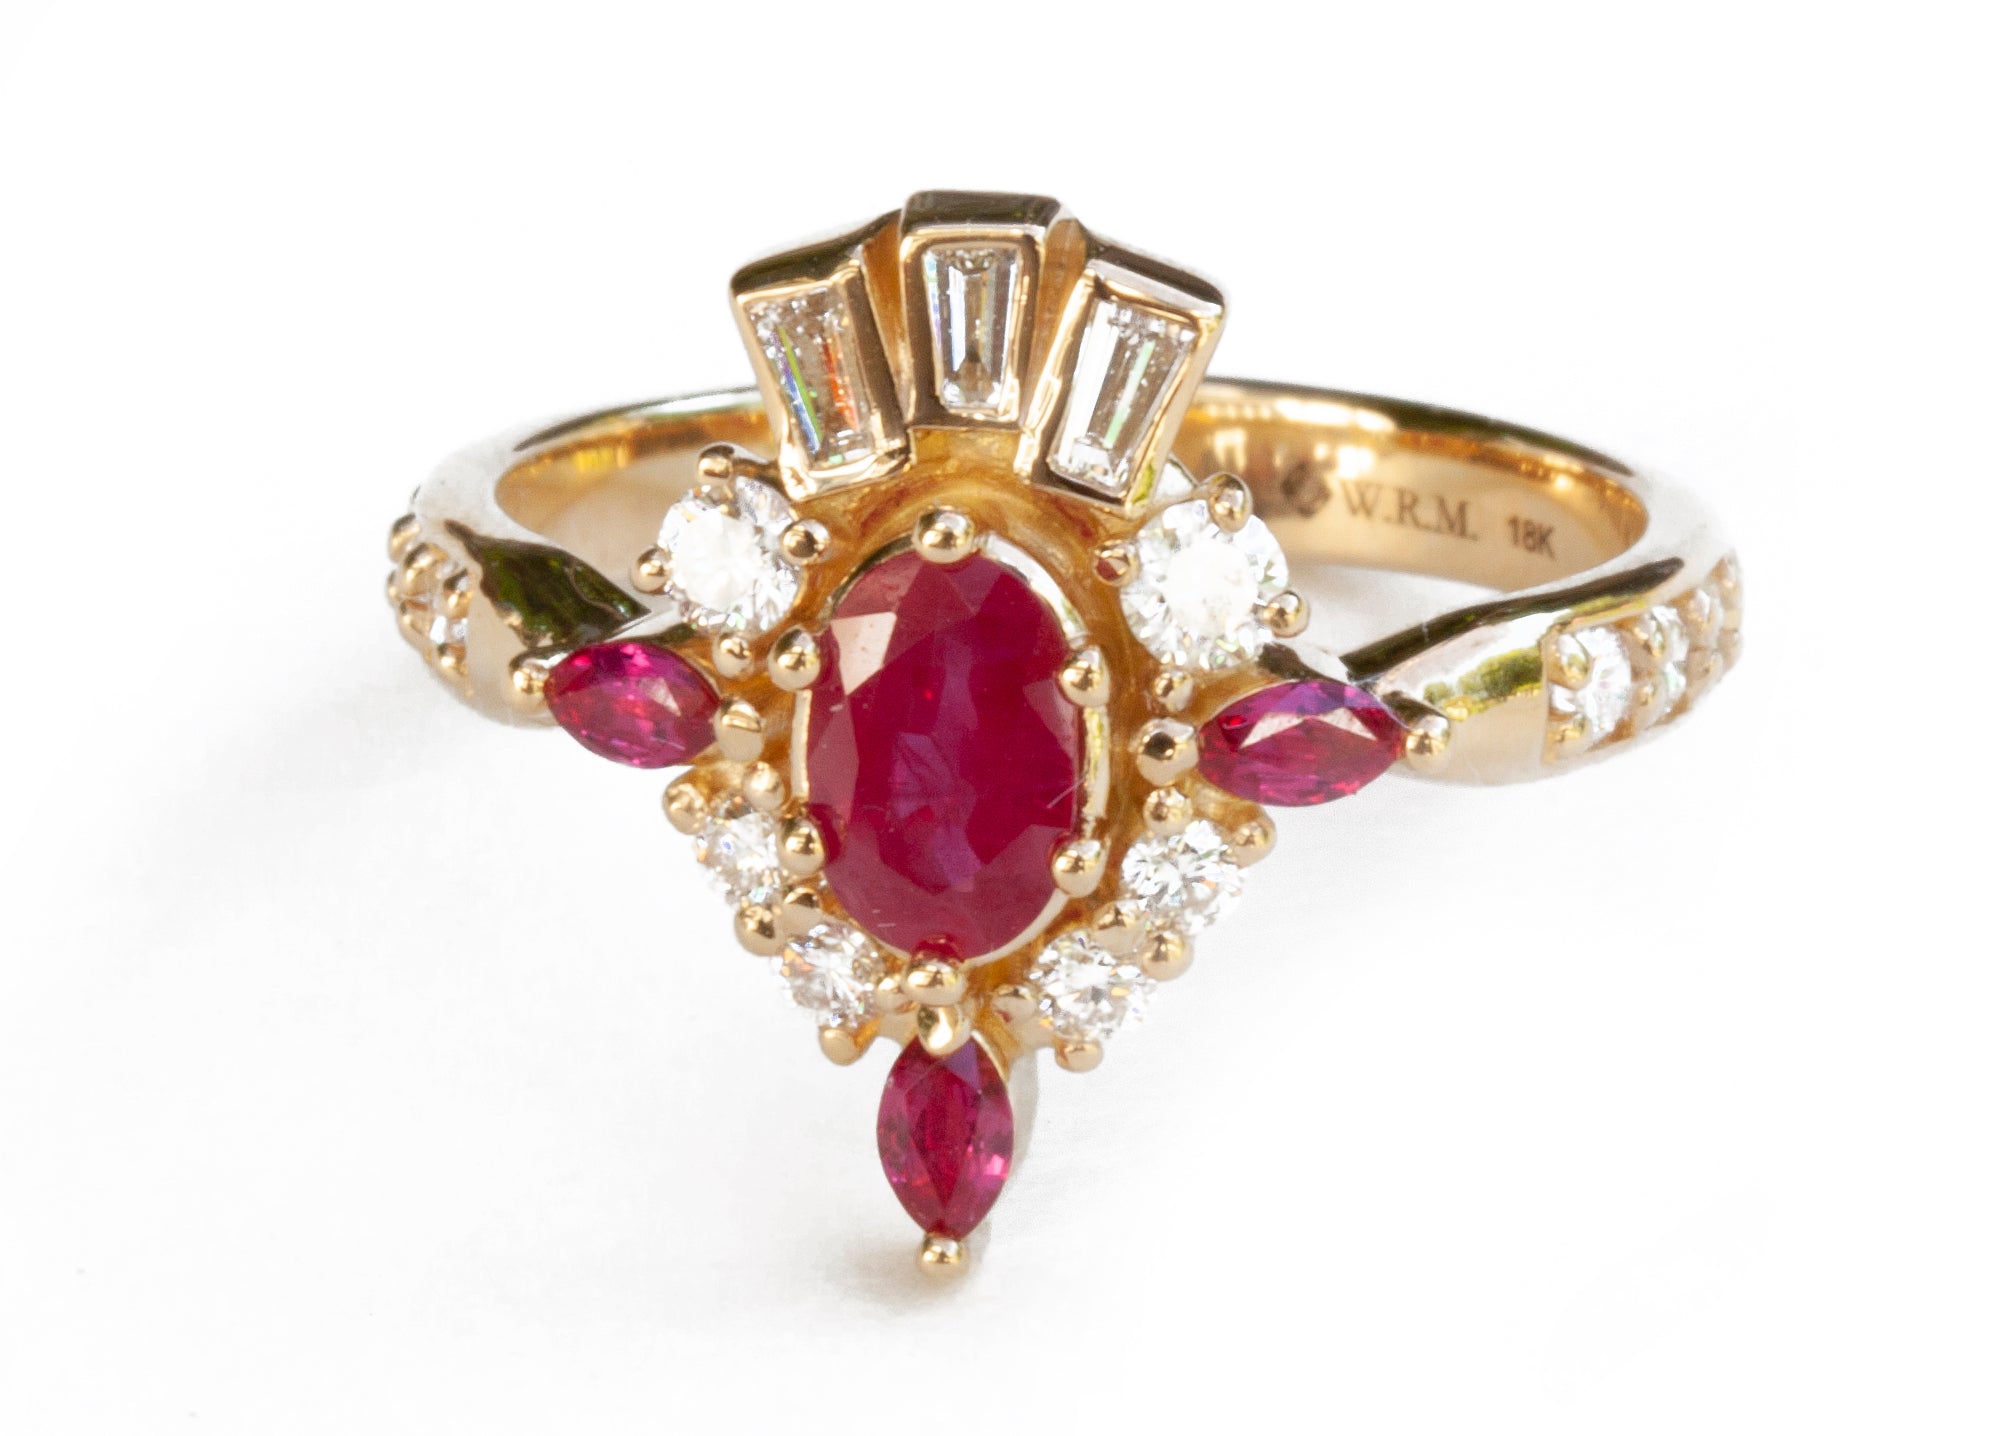 Custom ring with client's heirloom rubies in 18k yellow gold